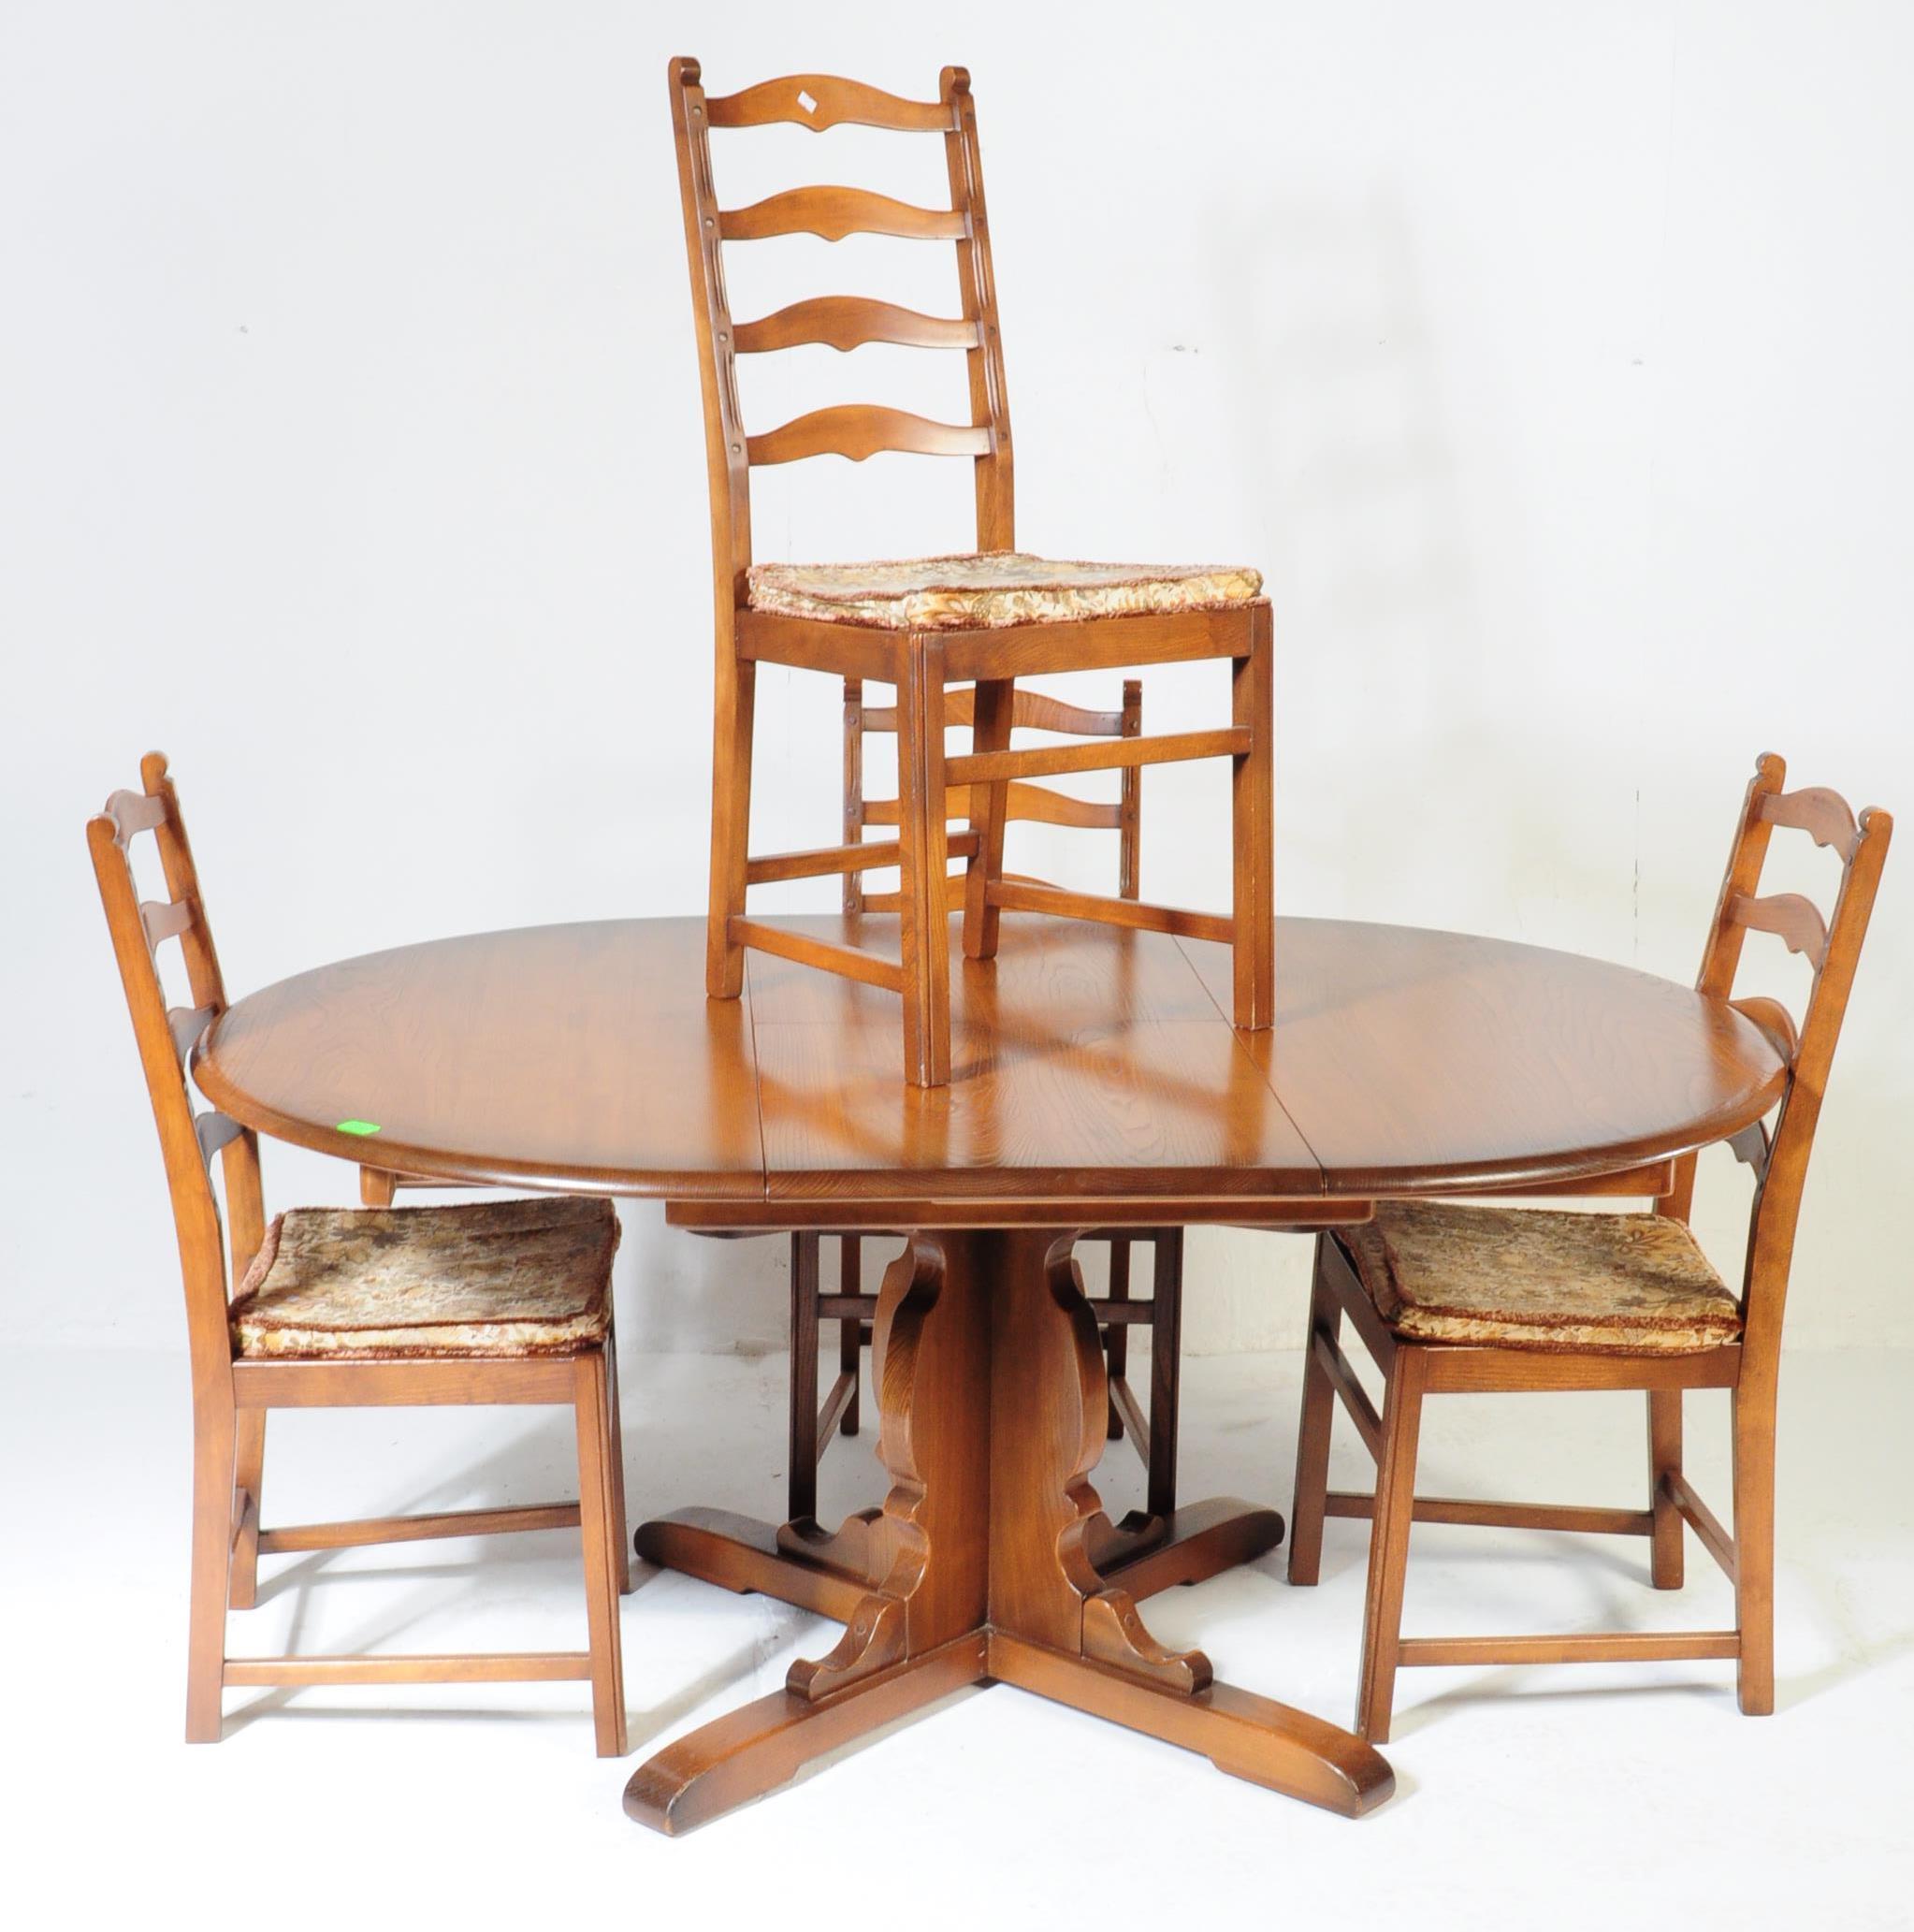 ERCOL FURNITURE - BEECH & ELM WOOD DINING ROOM SUITE - - Image 2 of 9